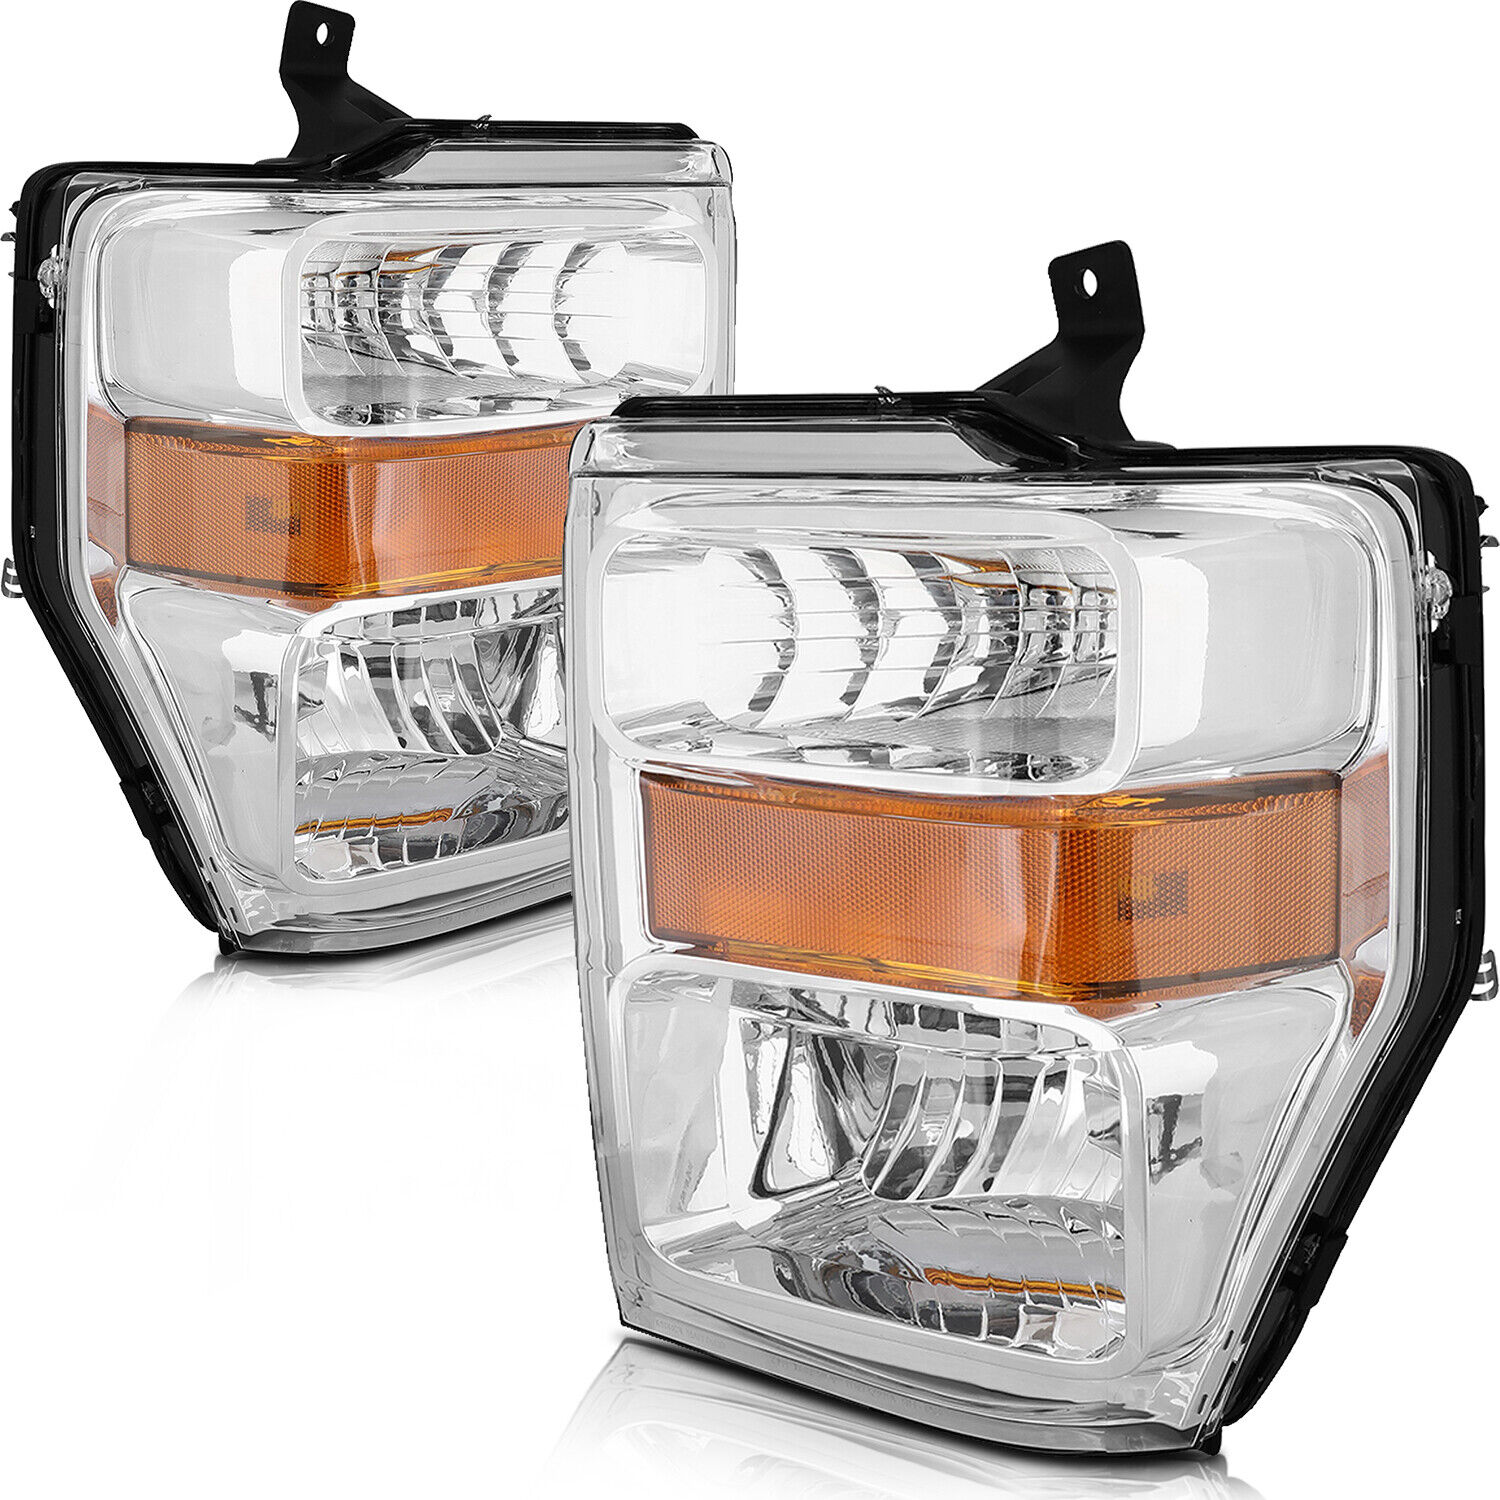 Headlight Assembly For 2008-2010 Ford F250 F350 F450 Super Duty Chrome Headlamp